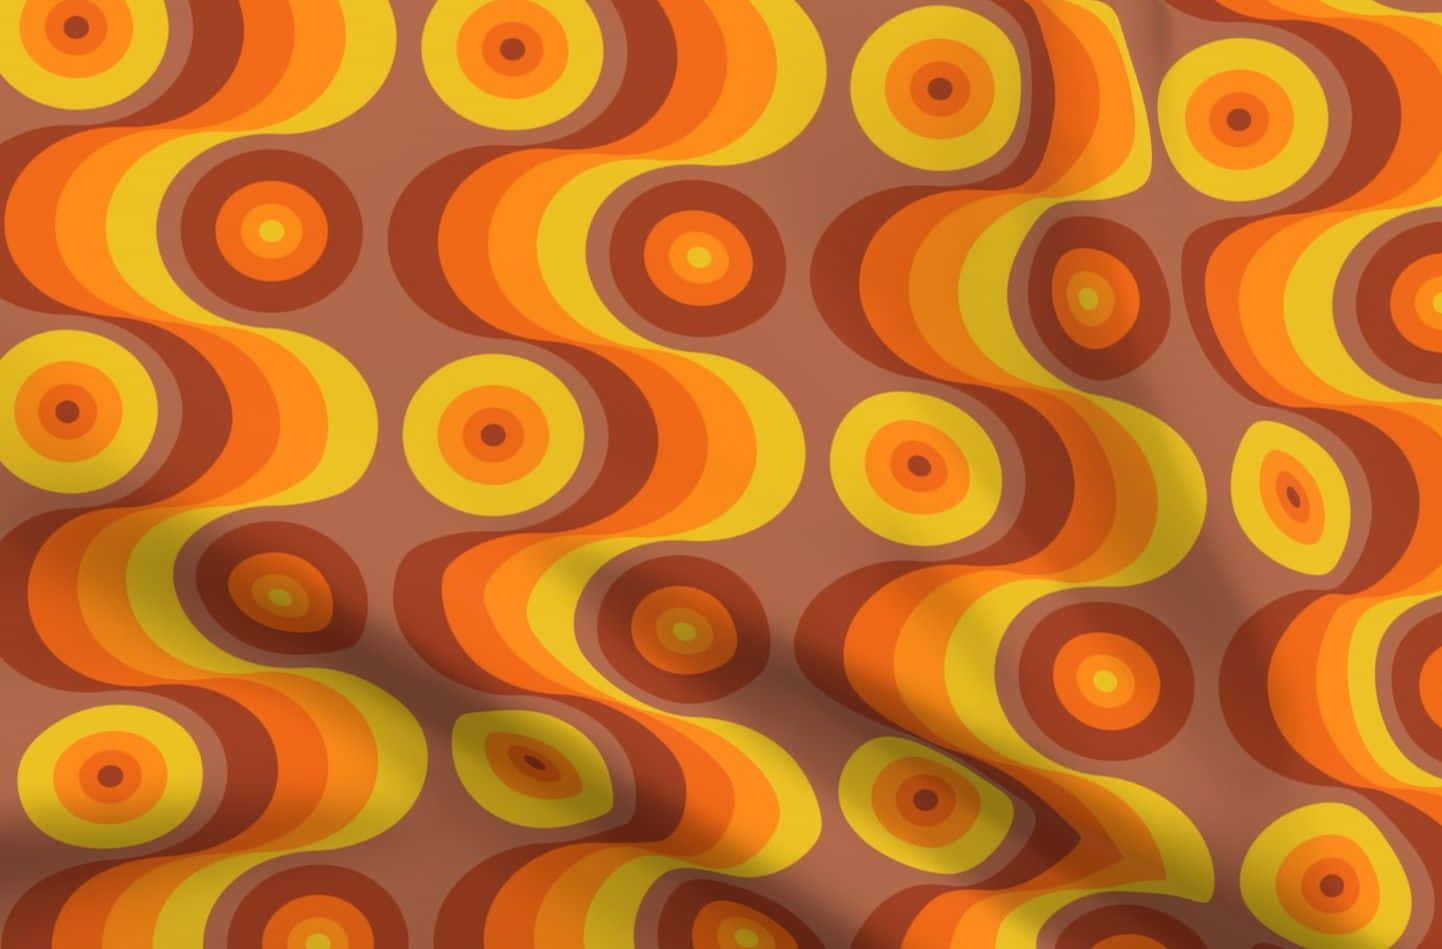 70's Groovy Background Yellow Circular And Wavy Texture